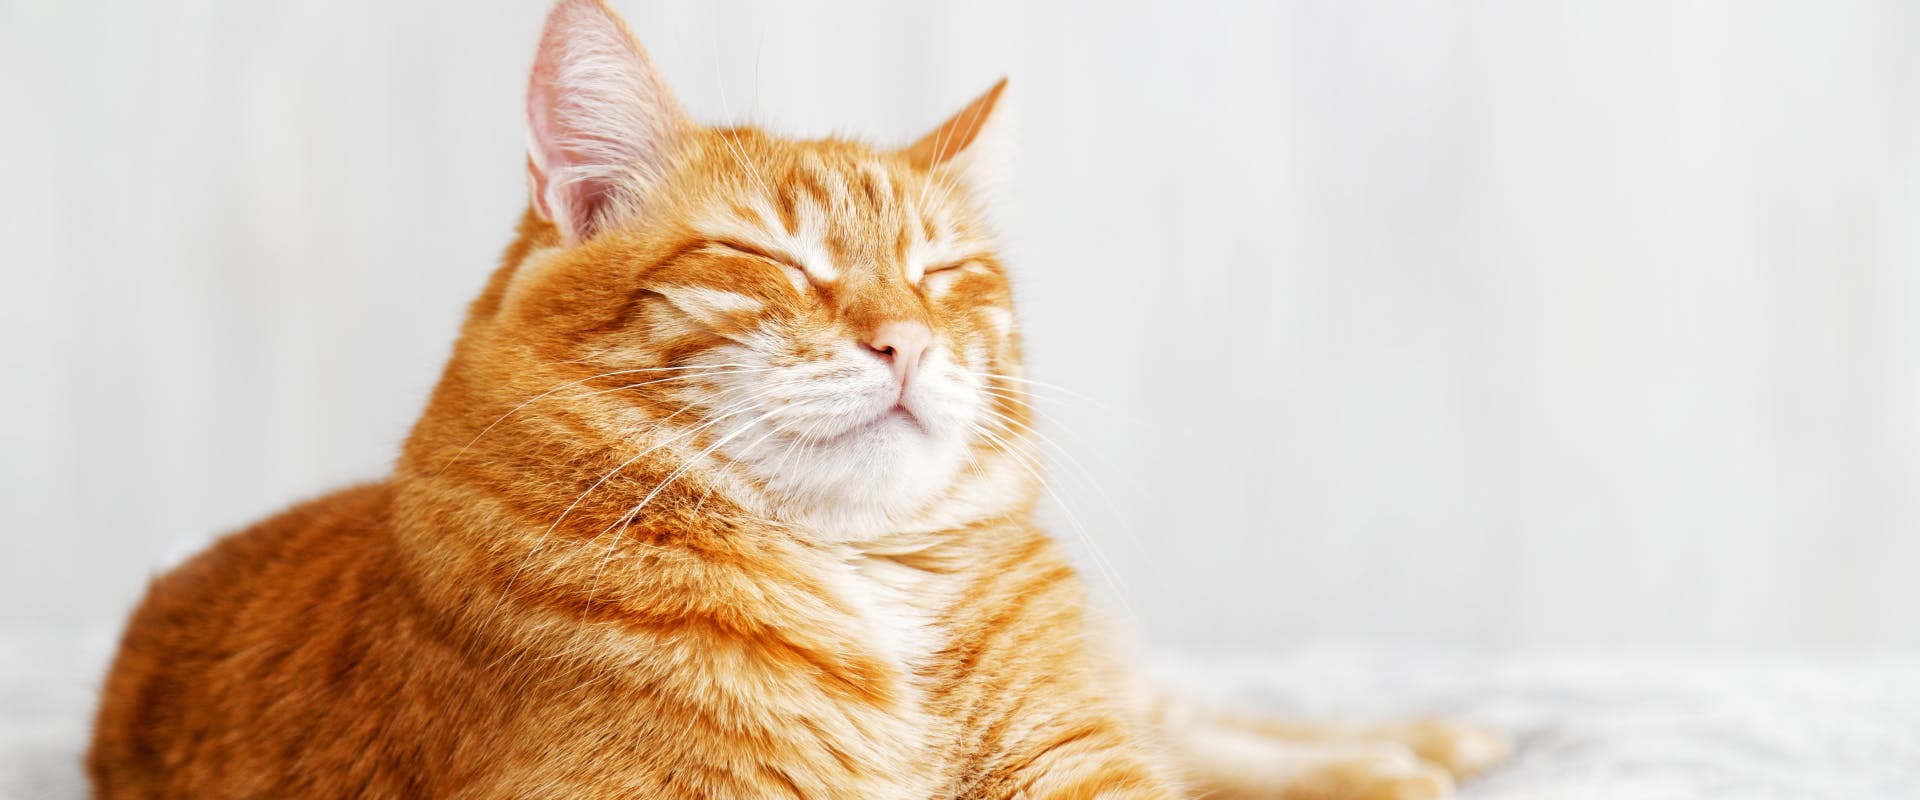 ginger cat lying on a bed with its eyes closed